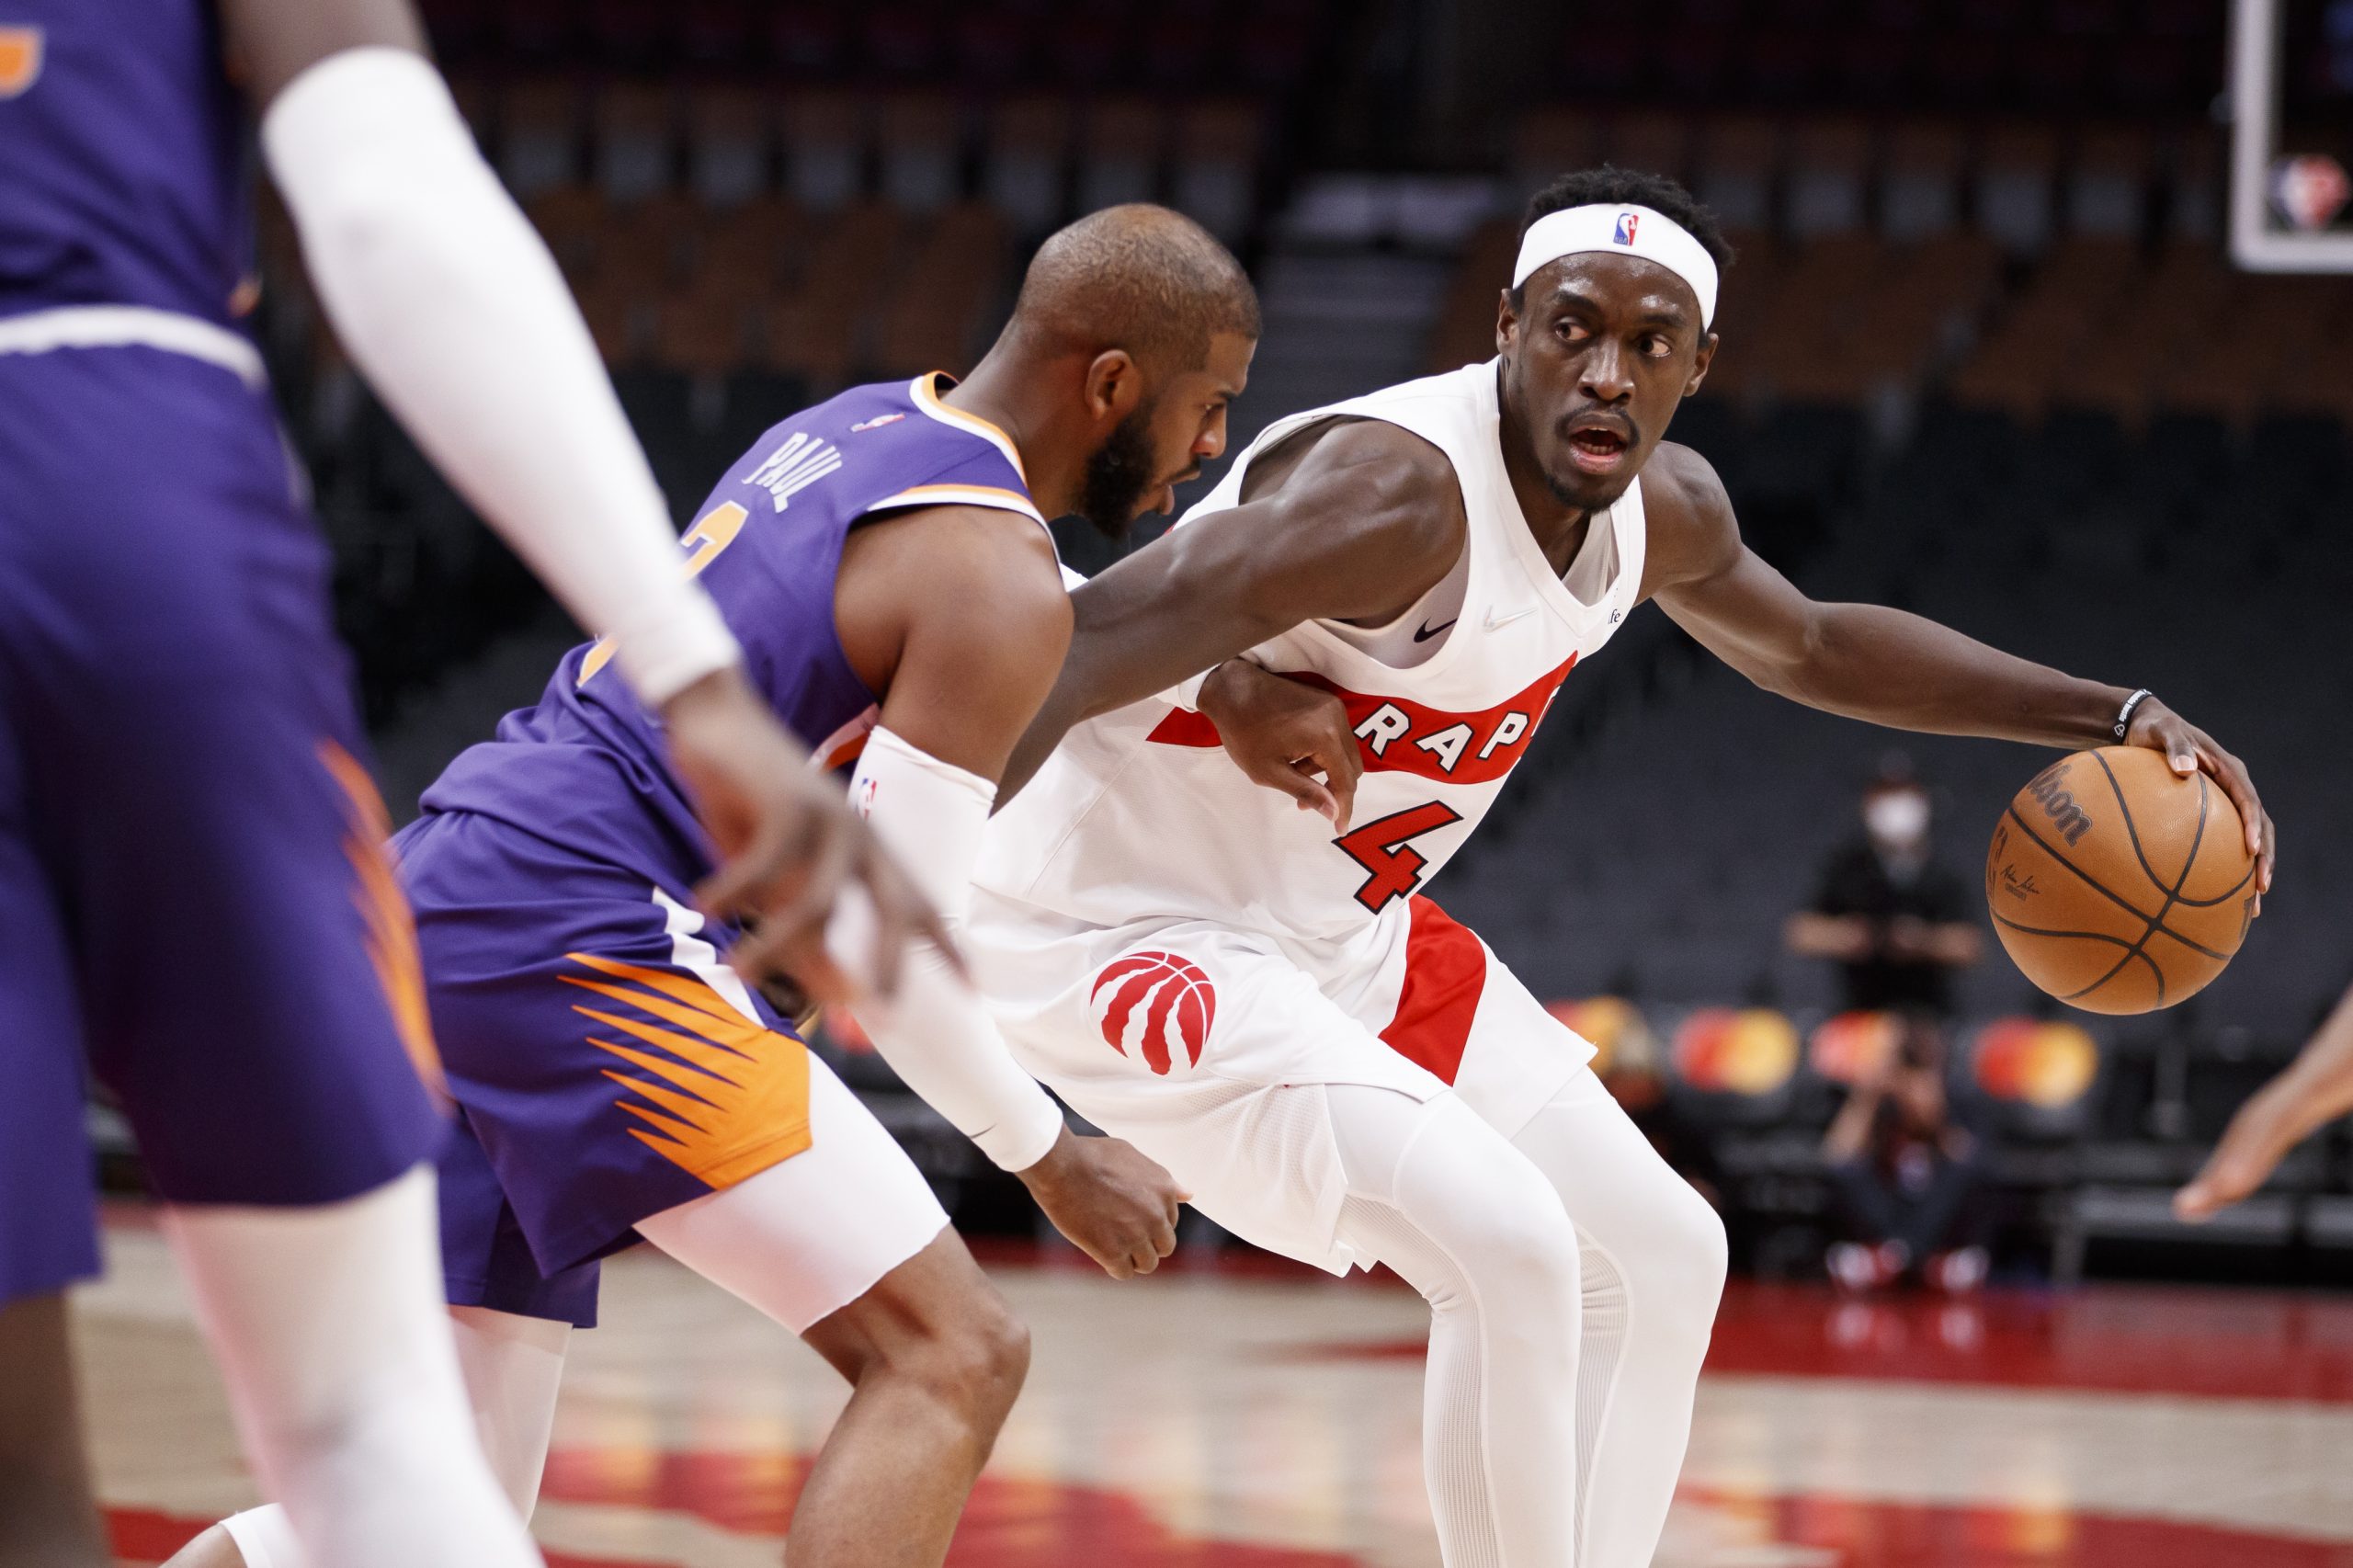 Toronto Raptors standout forward Pascal Siakam battles in the post with Phoenix Suns superrstar point guard Chris Paul during a recent game in Toronto.